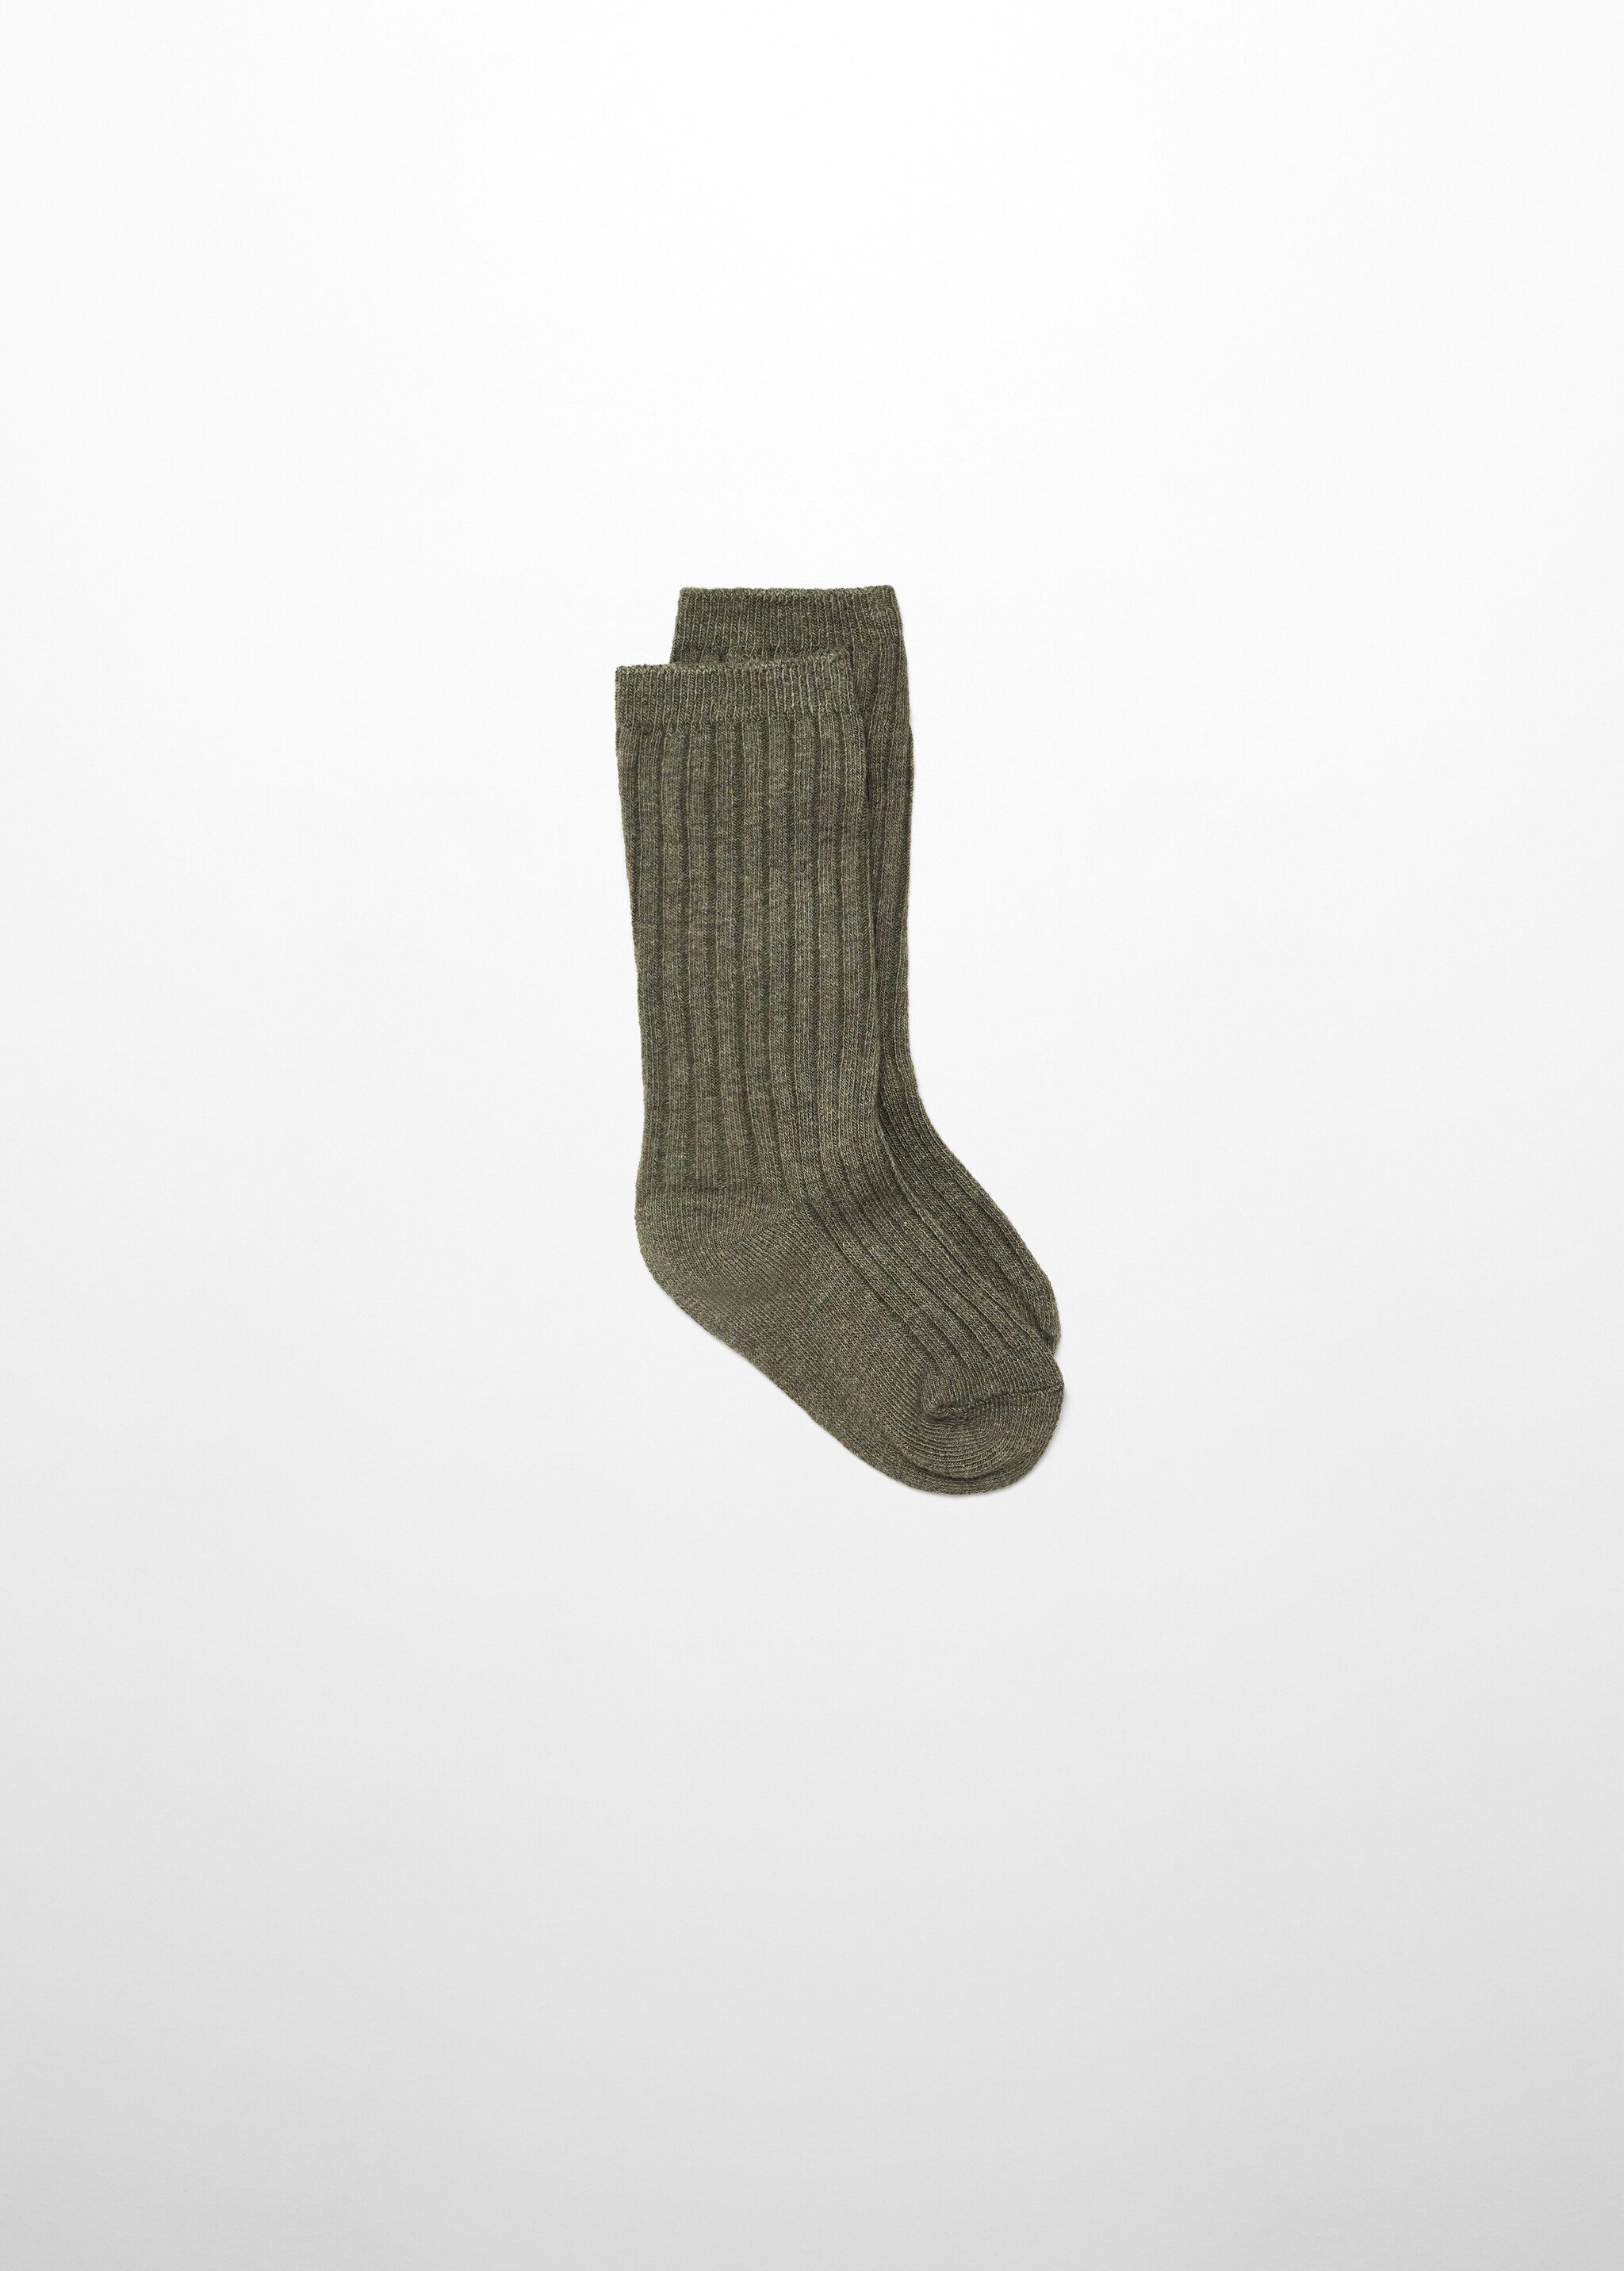 Long knitted socks - Article without model